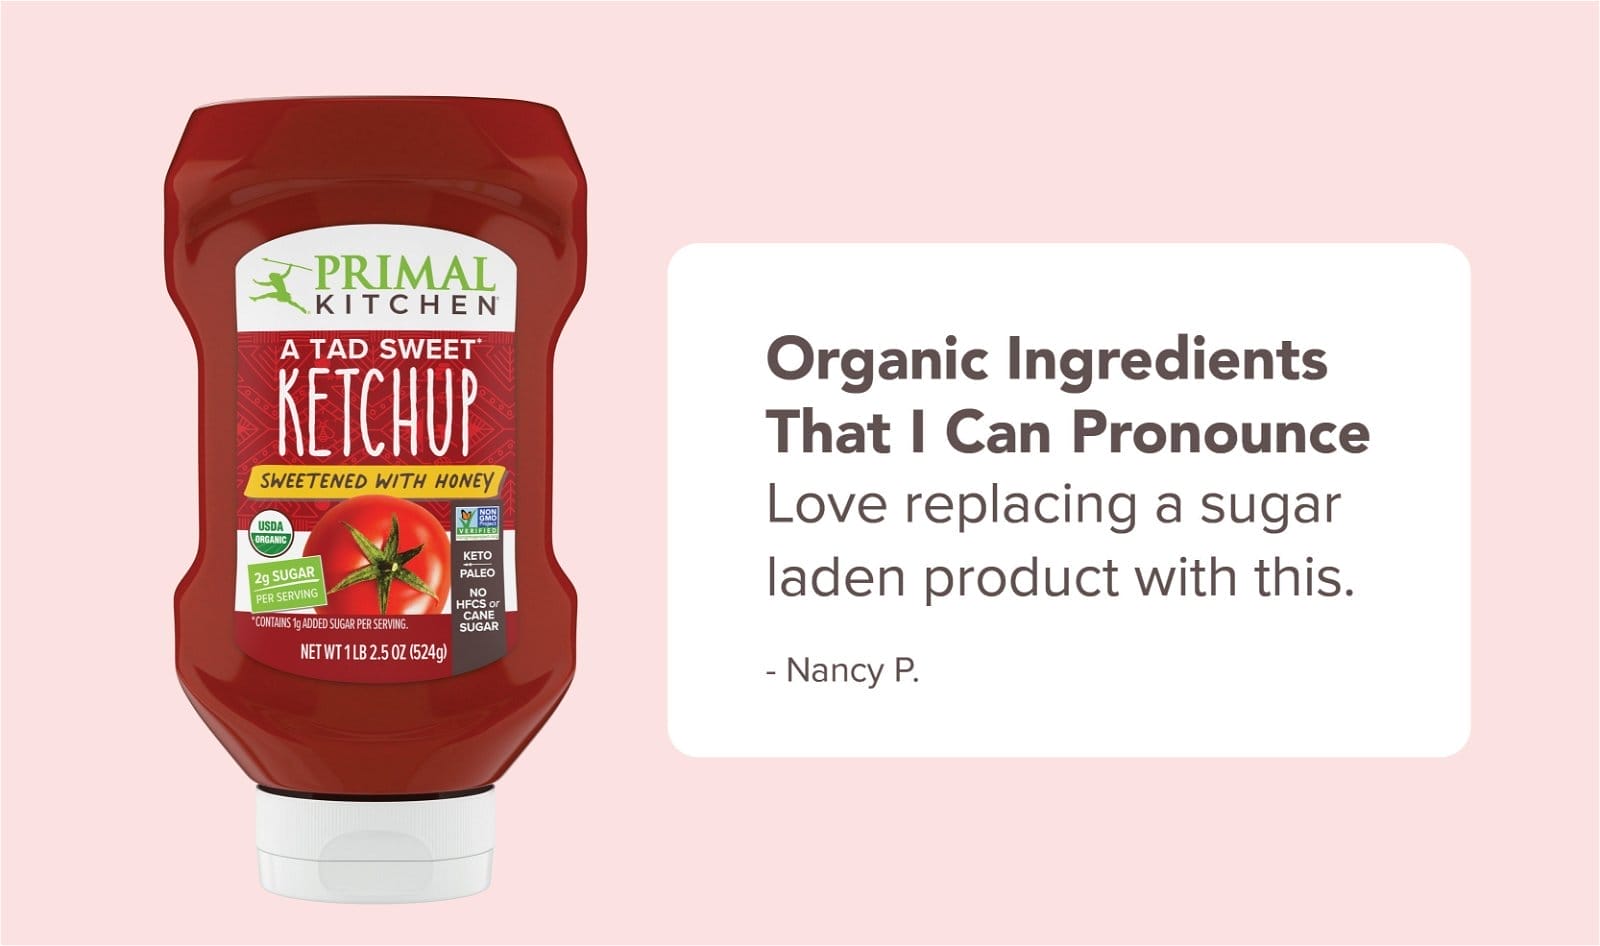 "Organic ingredients that I can pronounce. Love replacing a sugar laden product with this." - Nancy P.